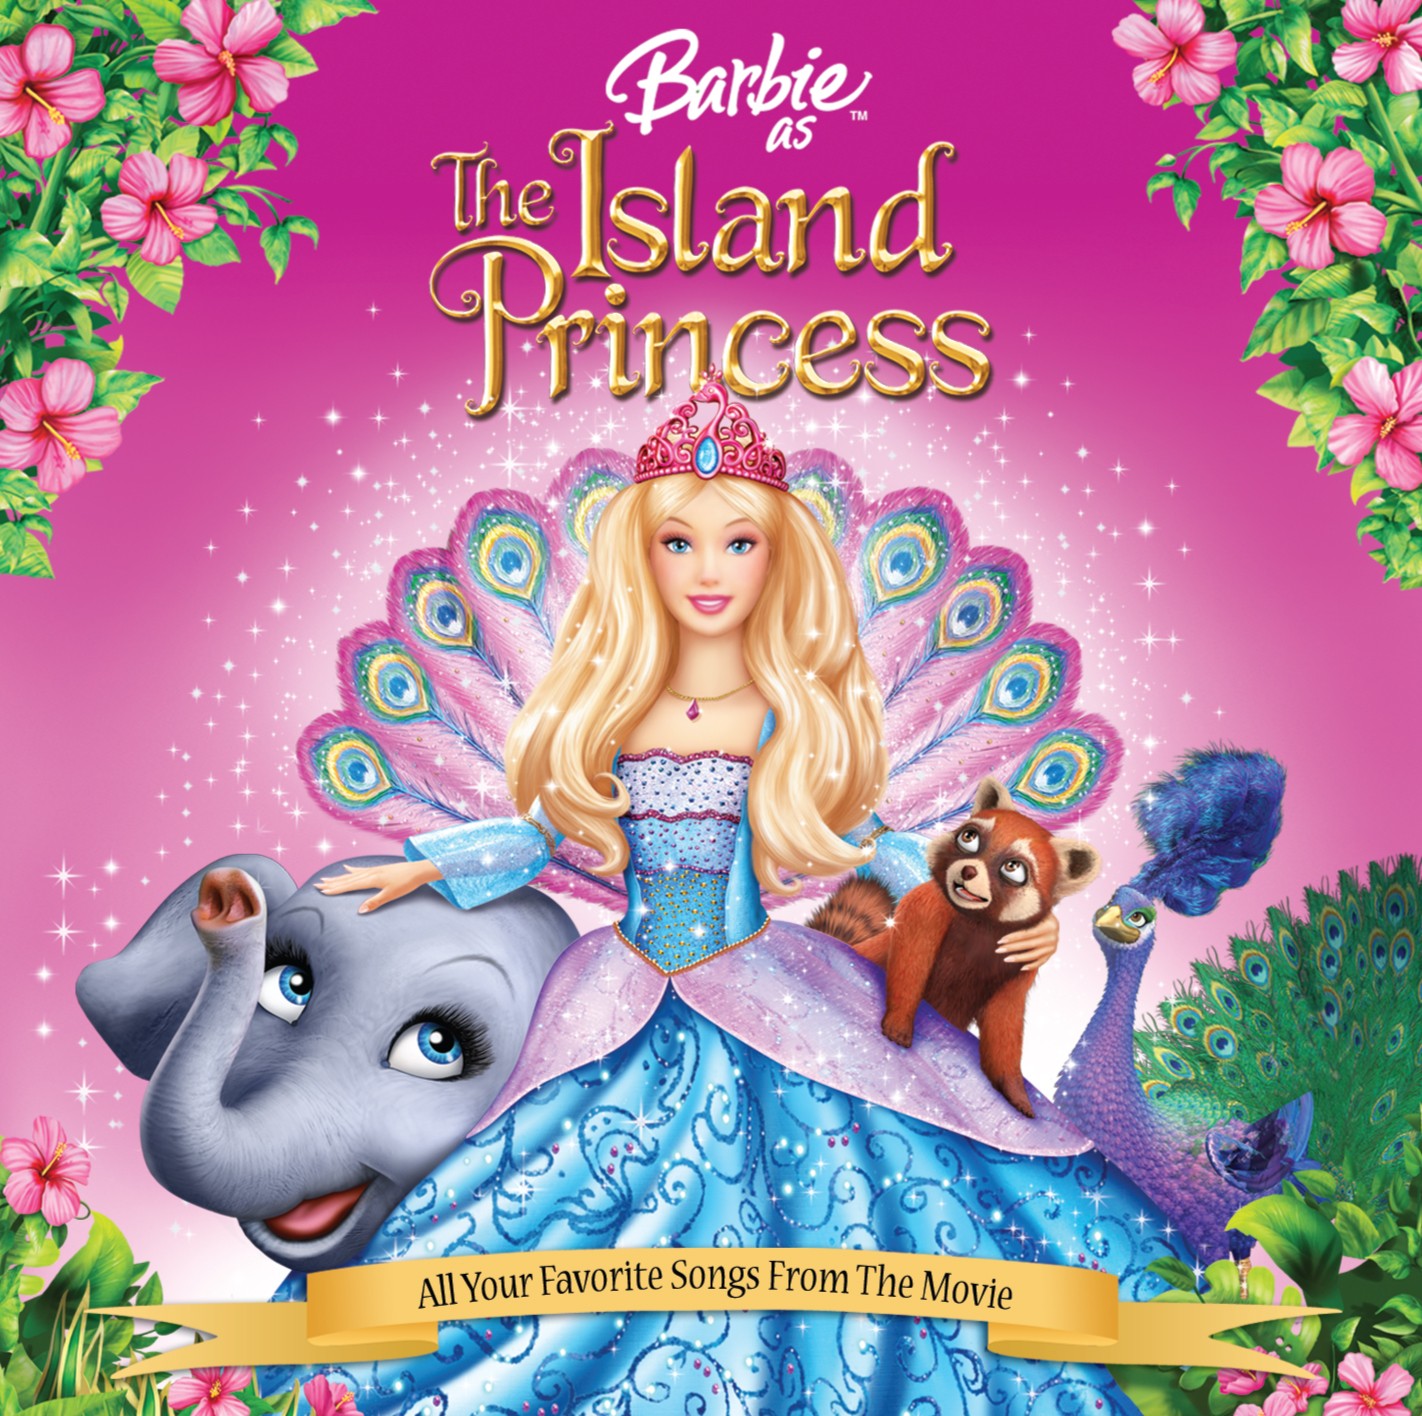 barbie princess and the pauper songs if you love me for me lyrics